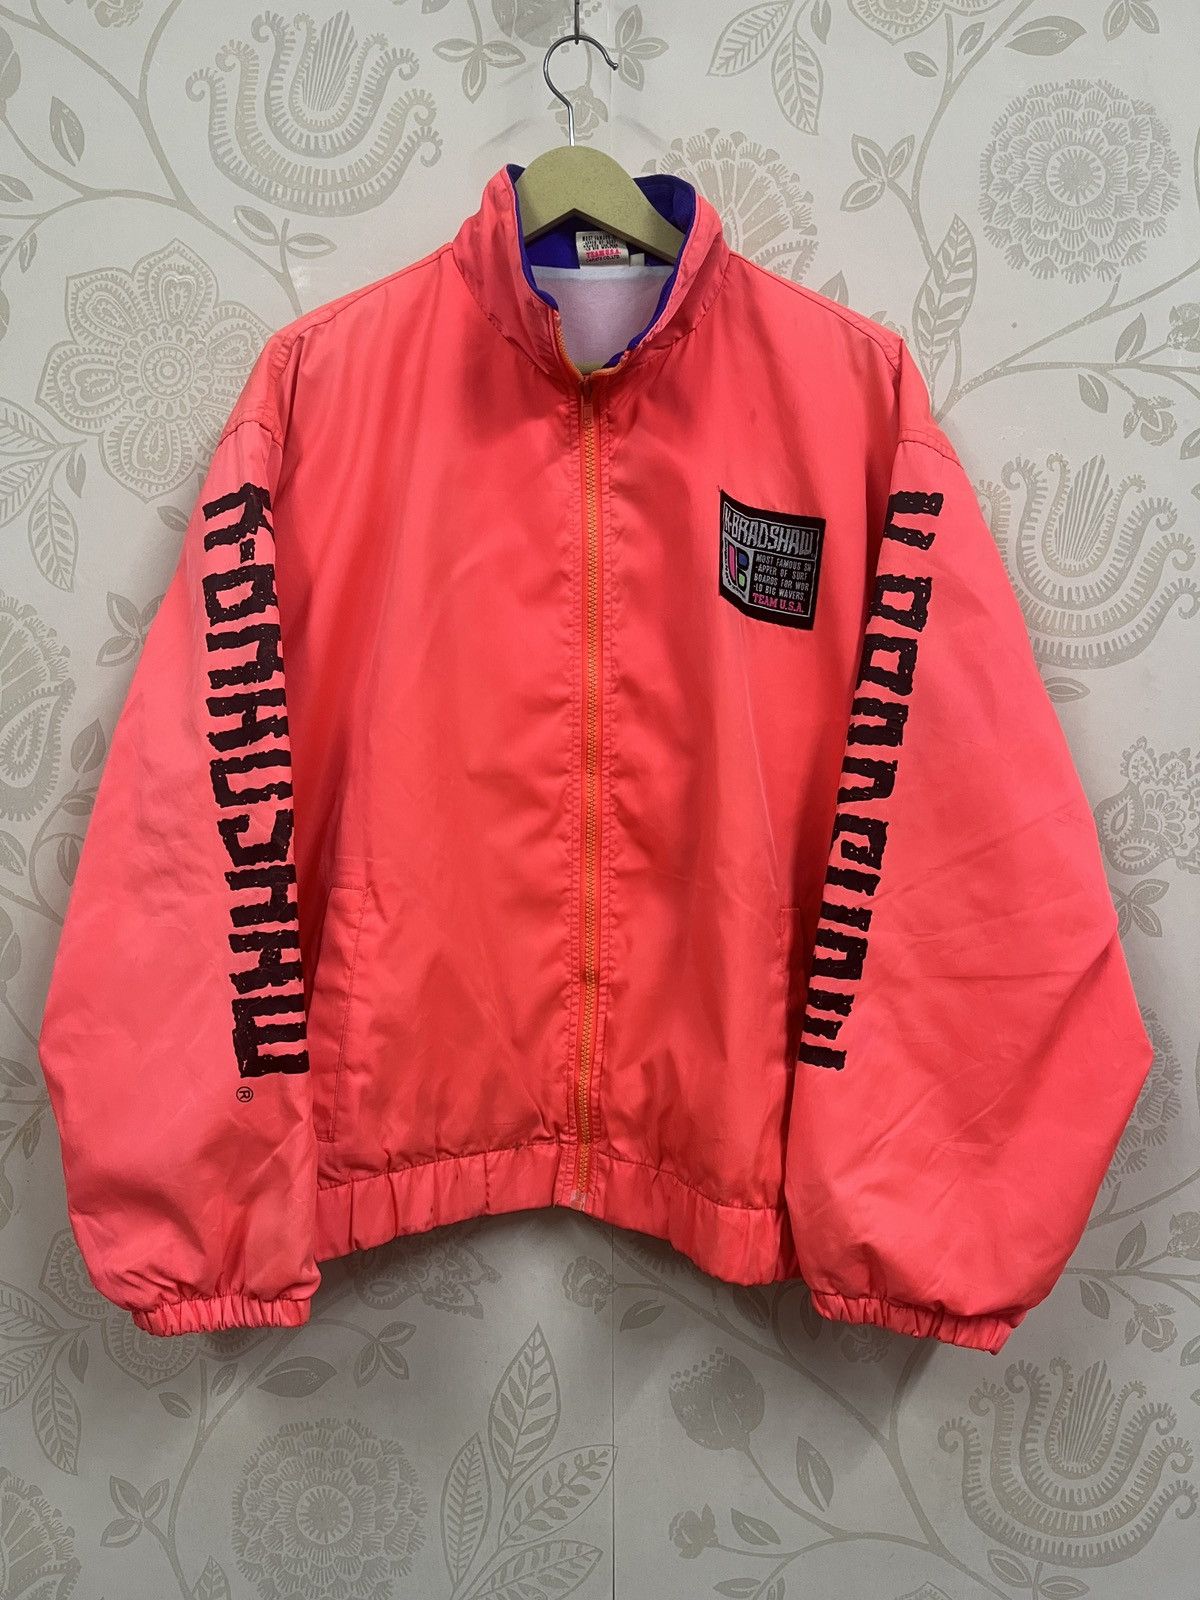 Vintage 80s Surf Style Jacket Fluorescent Red Hawaii USA - 1